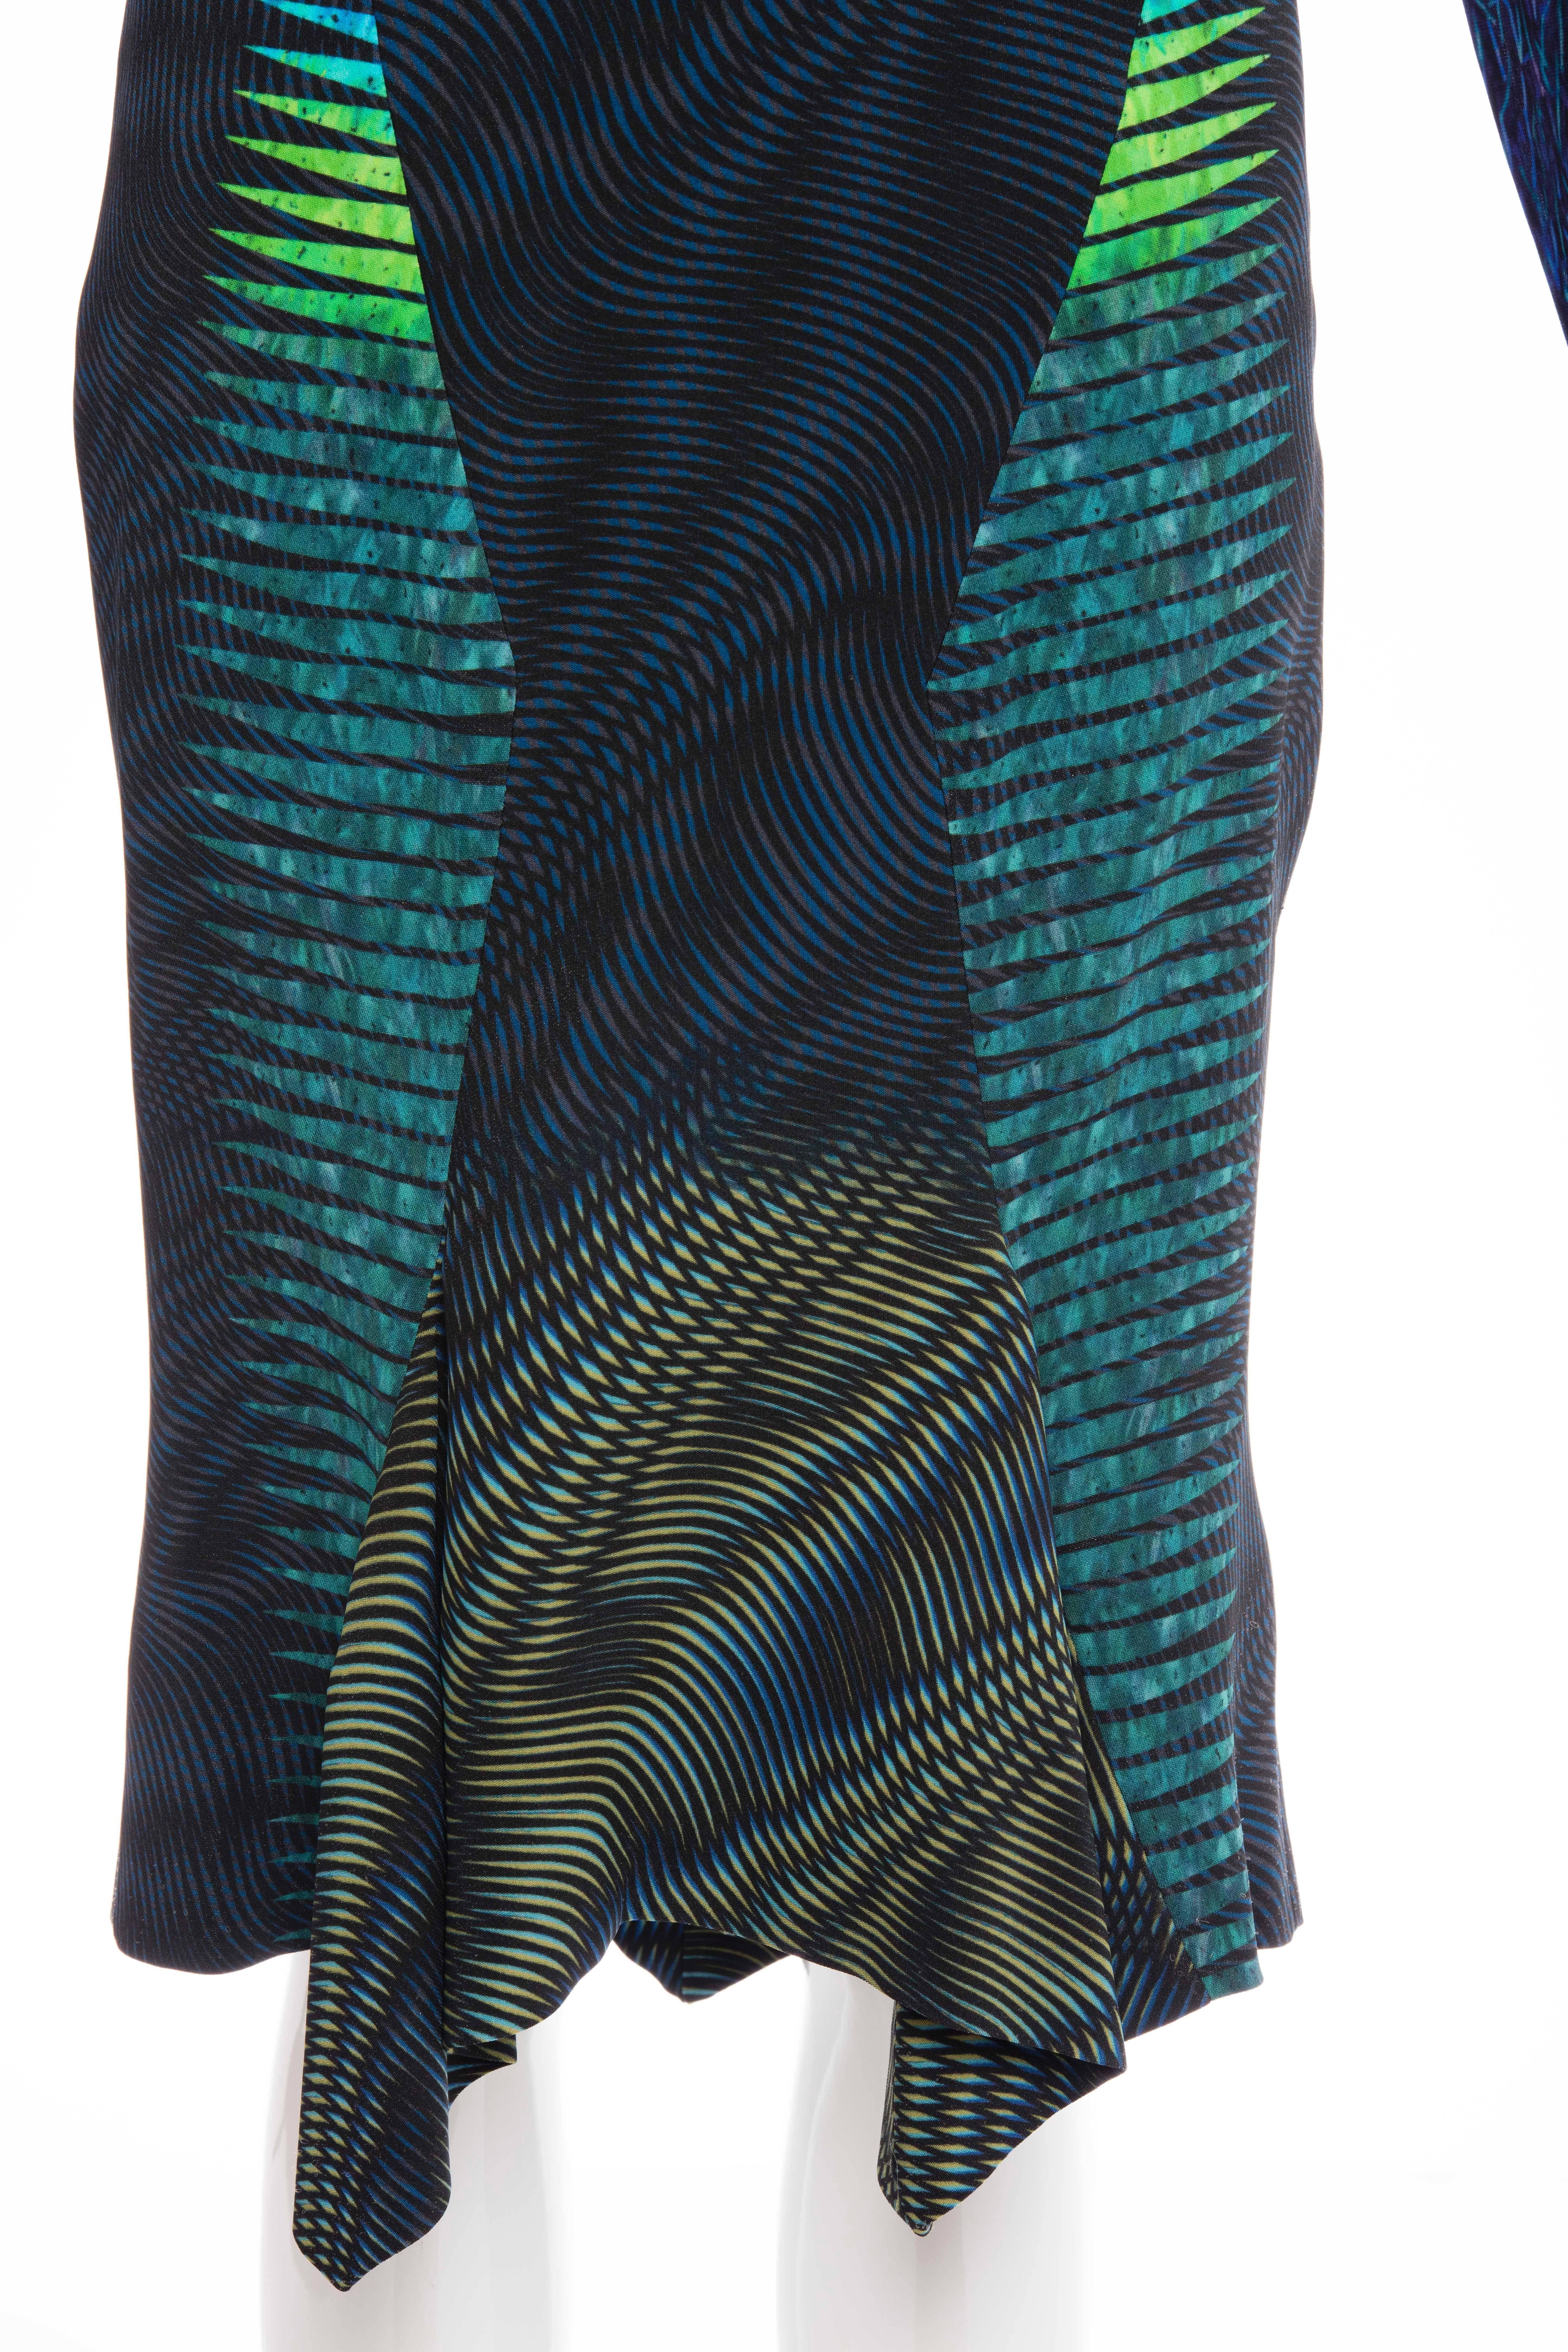 Peter Pilotto Graphic Printed Skirt Suit, Fall 2012 For Sale 1